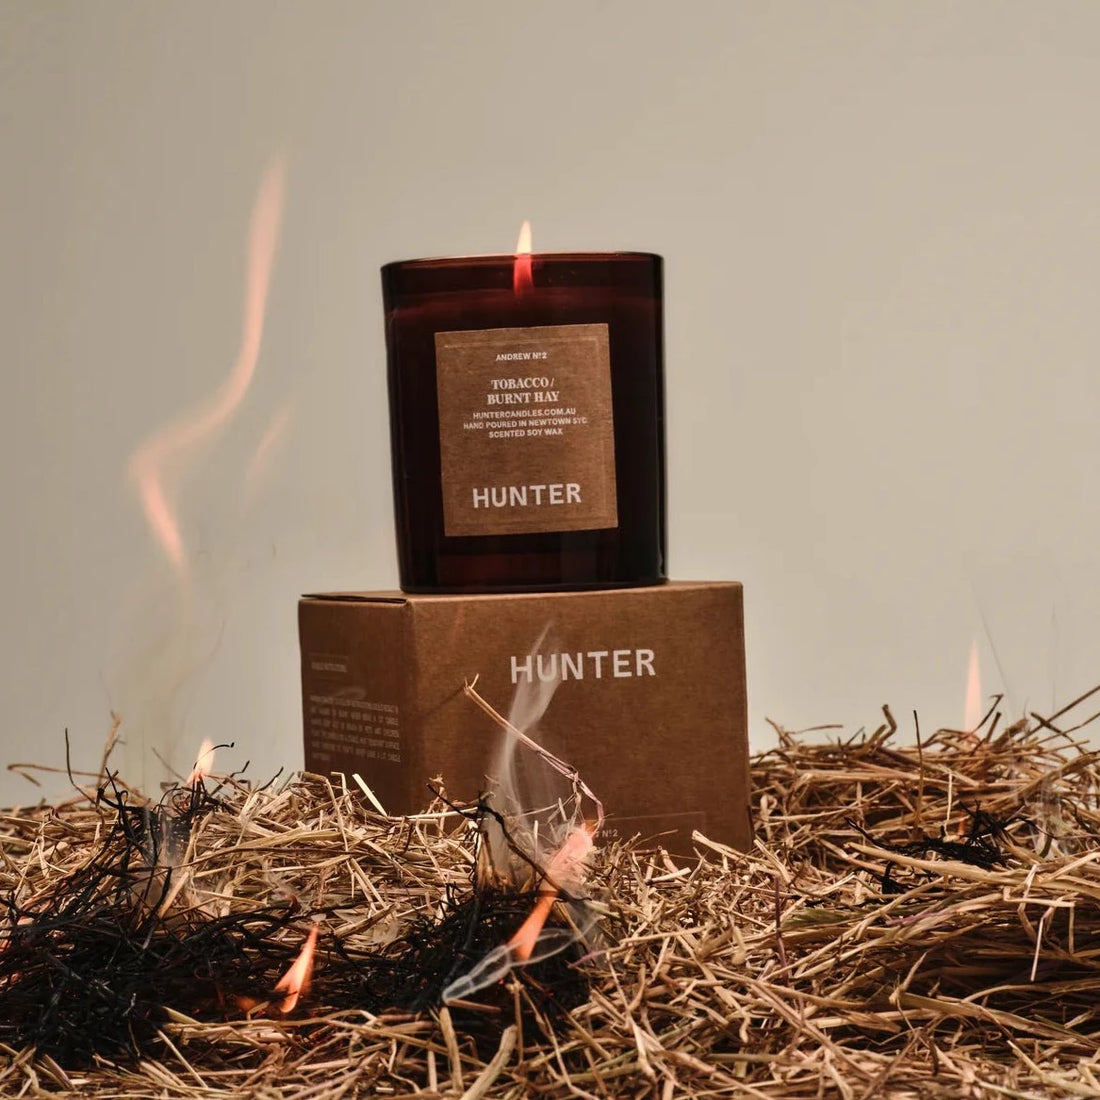 Hunter Candles - Andrew, Tobacco + Burnt Hay - The Flower Crate